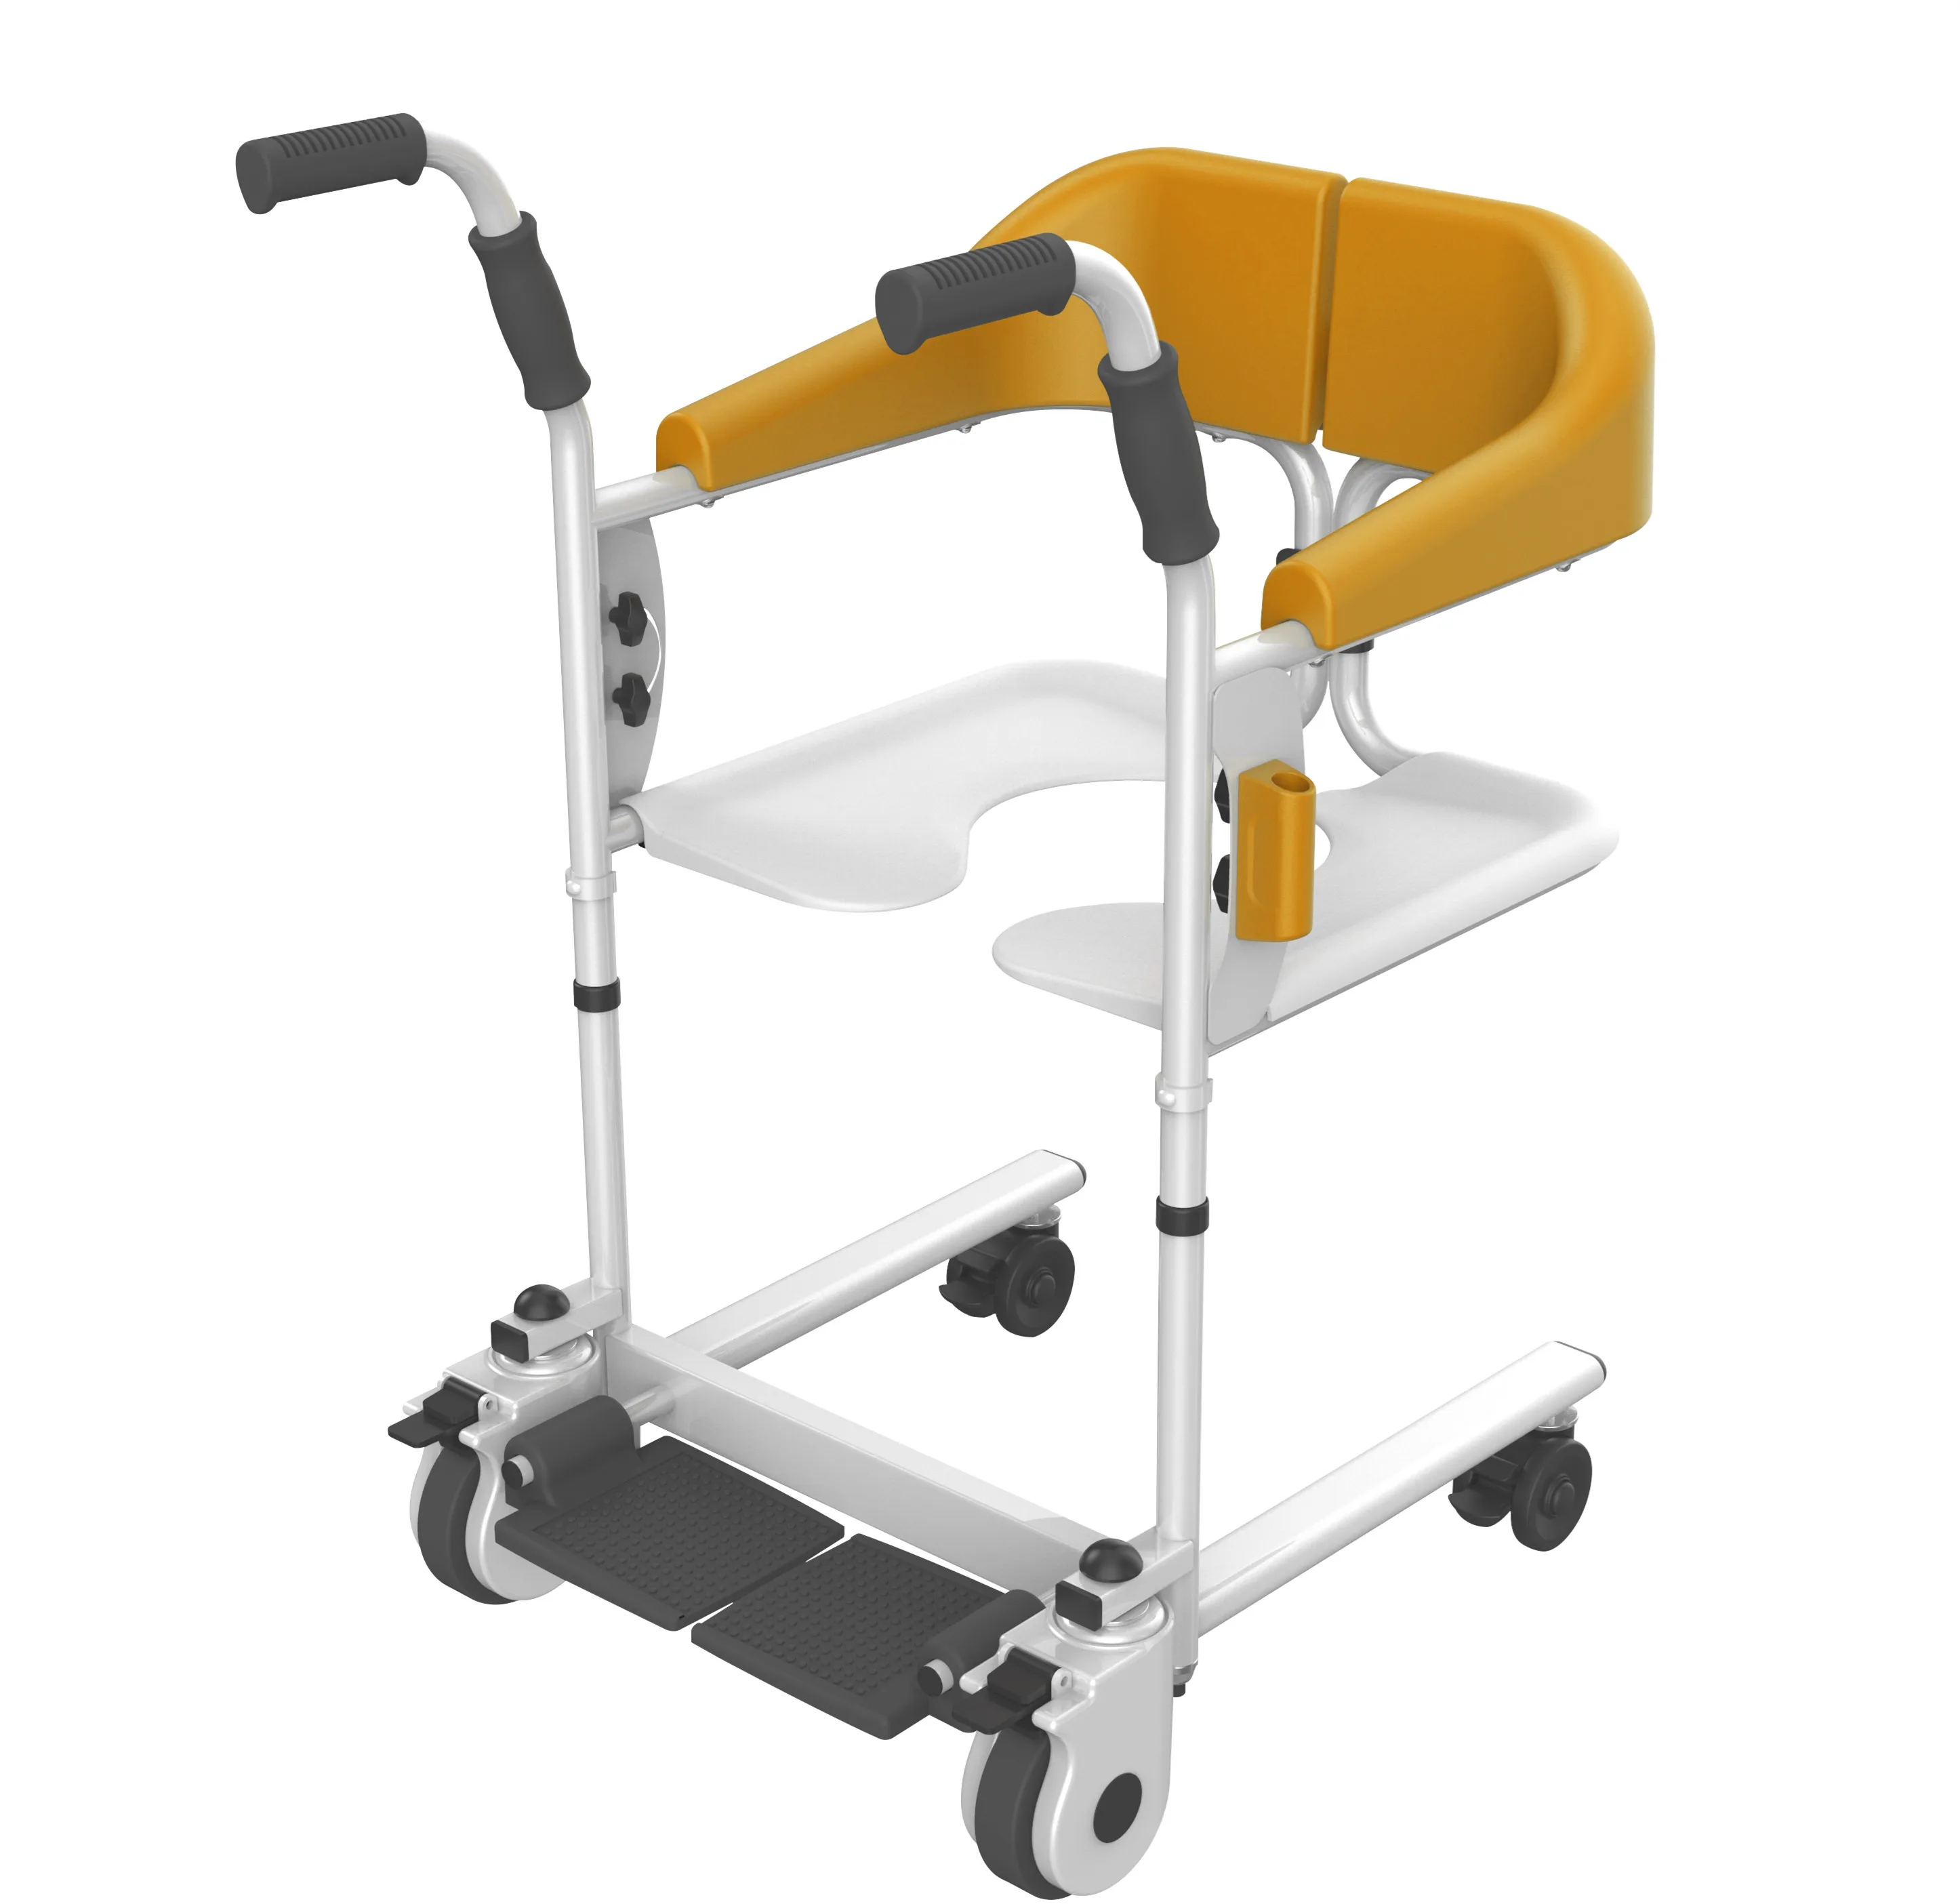 Best Sell Wheelchair With Toilet Transfer Commode Adjustable Bath Chair Hospital Nursing For Elderly And Disabled China Supplie Buy Wheelchair Hospital Nursing Wheelchair With Toilet Transfer Product On Alibaba Com